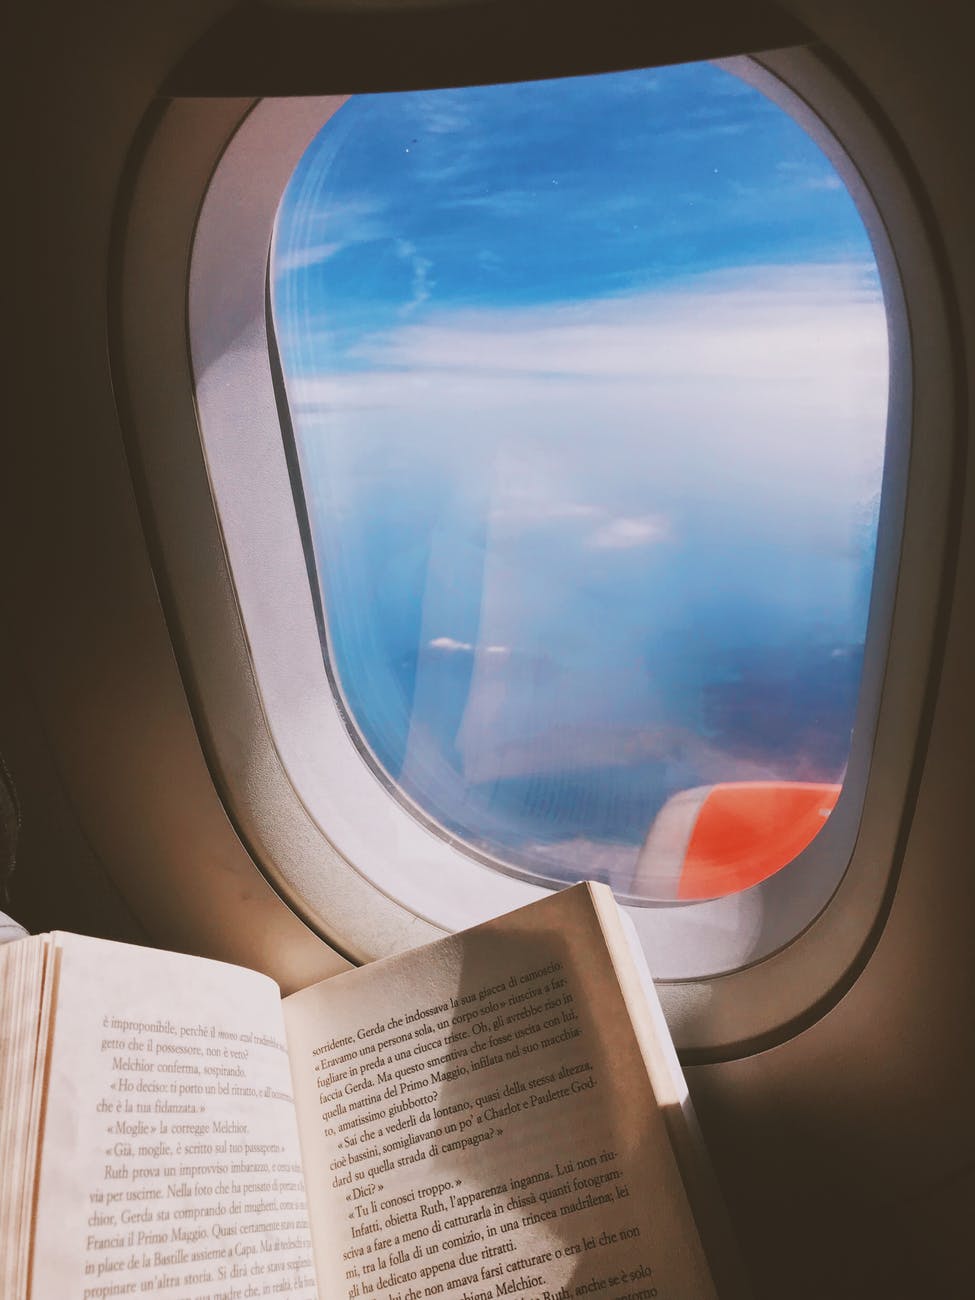 Read a book for air travel tips